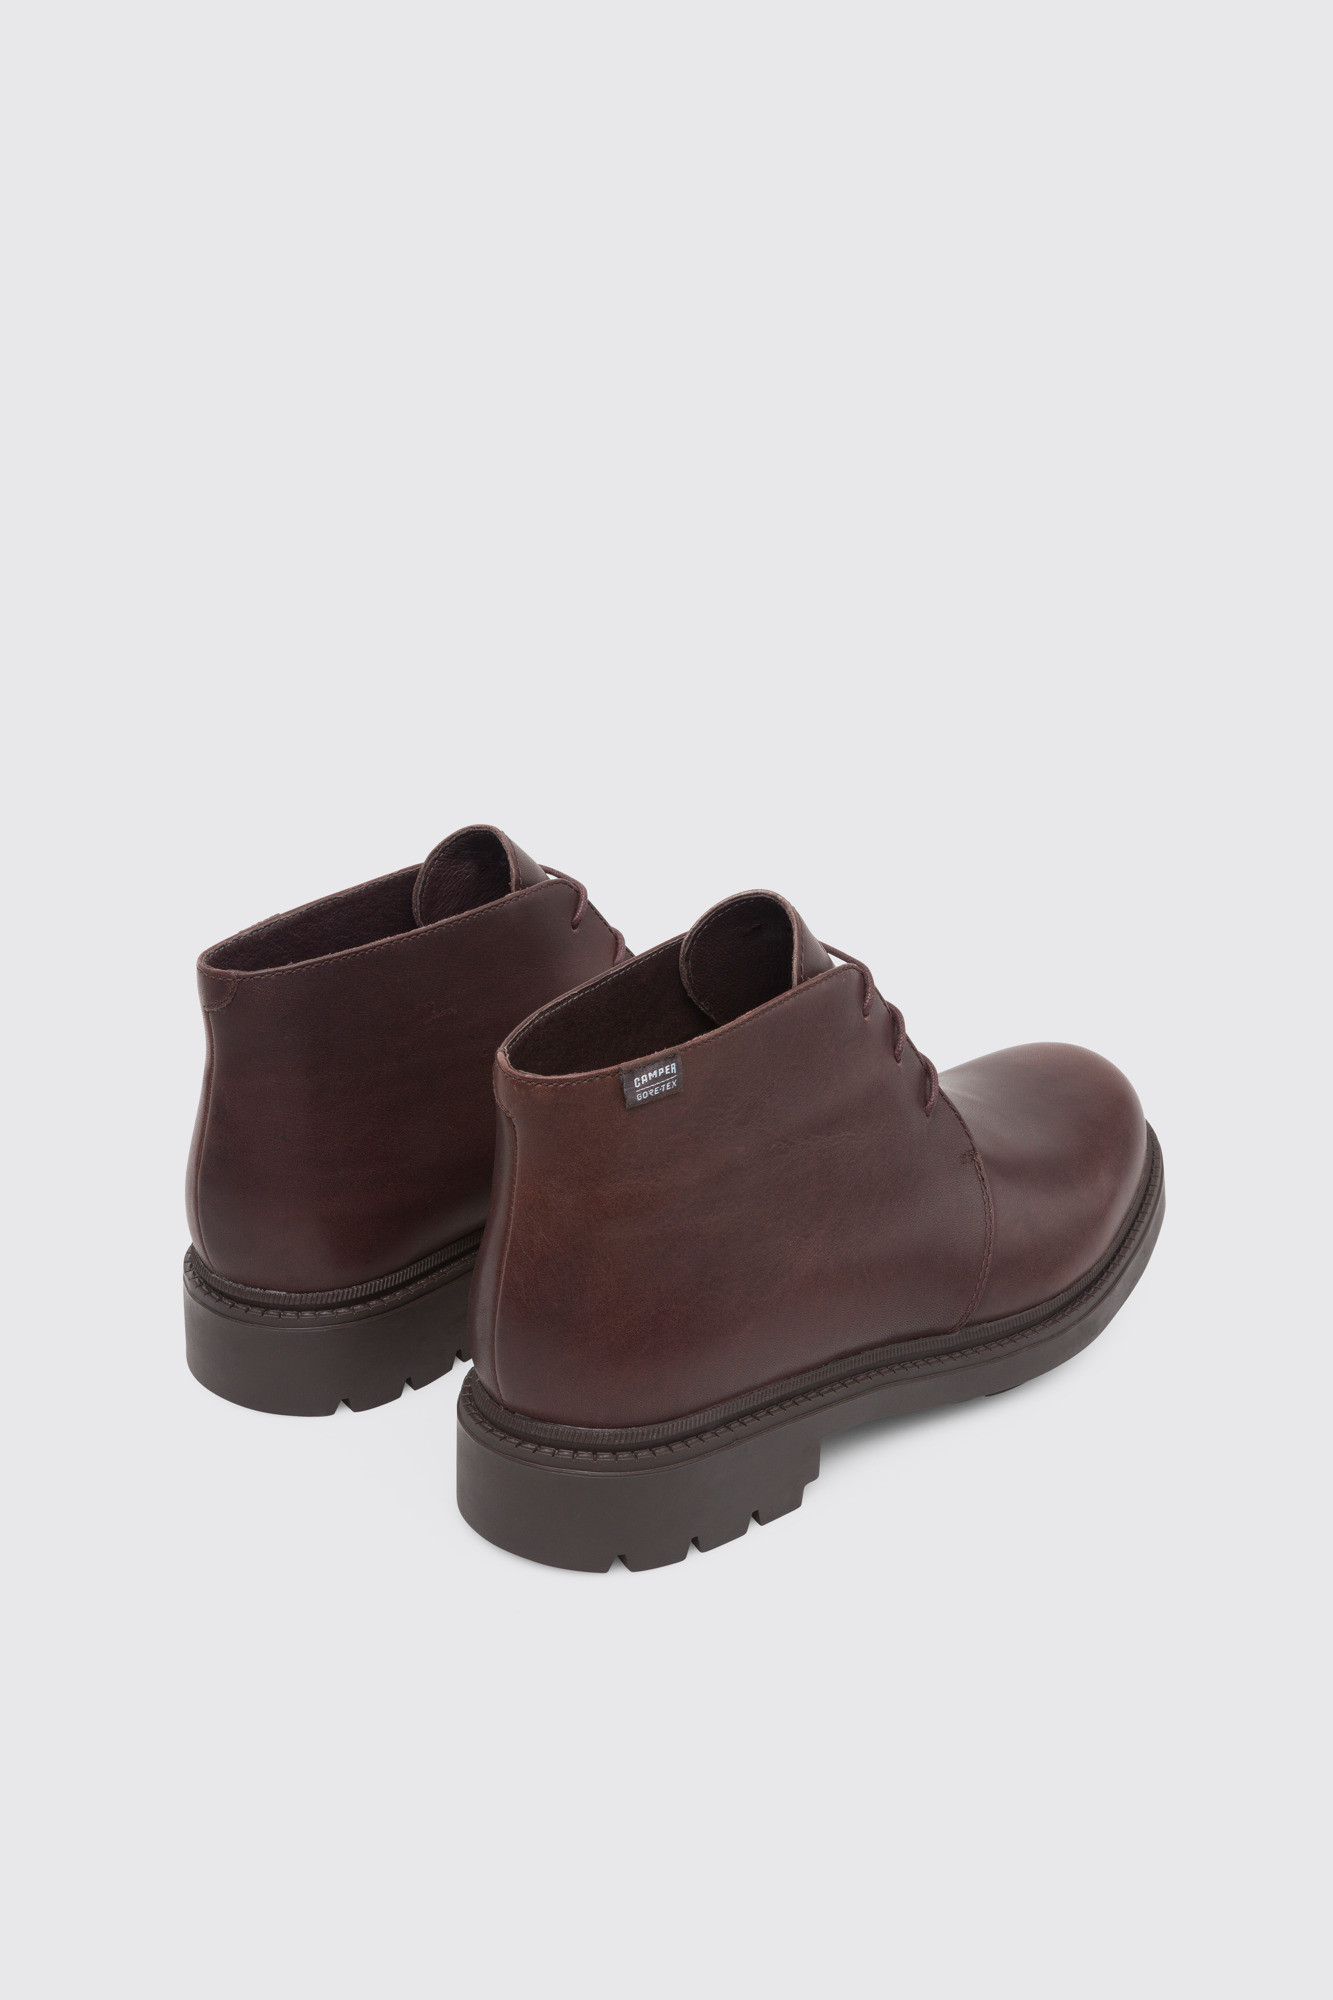 gore tex brown leather boots